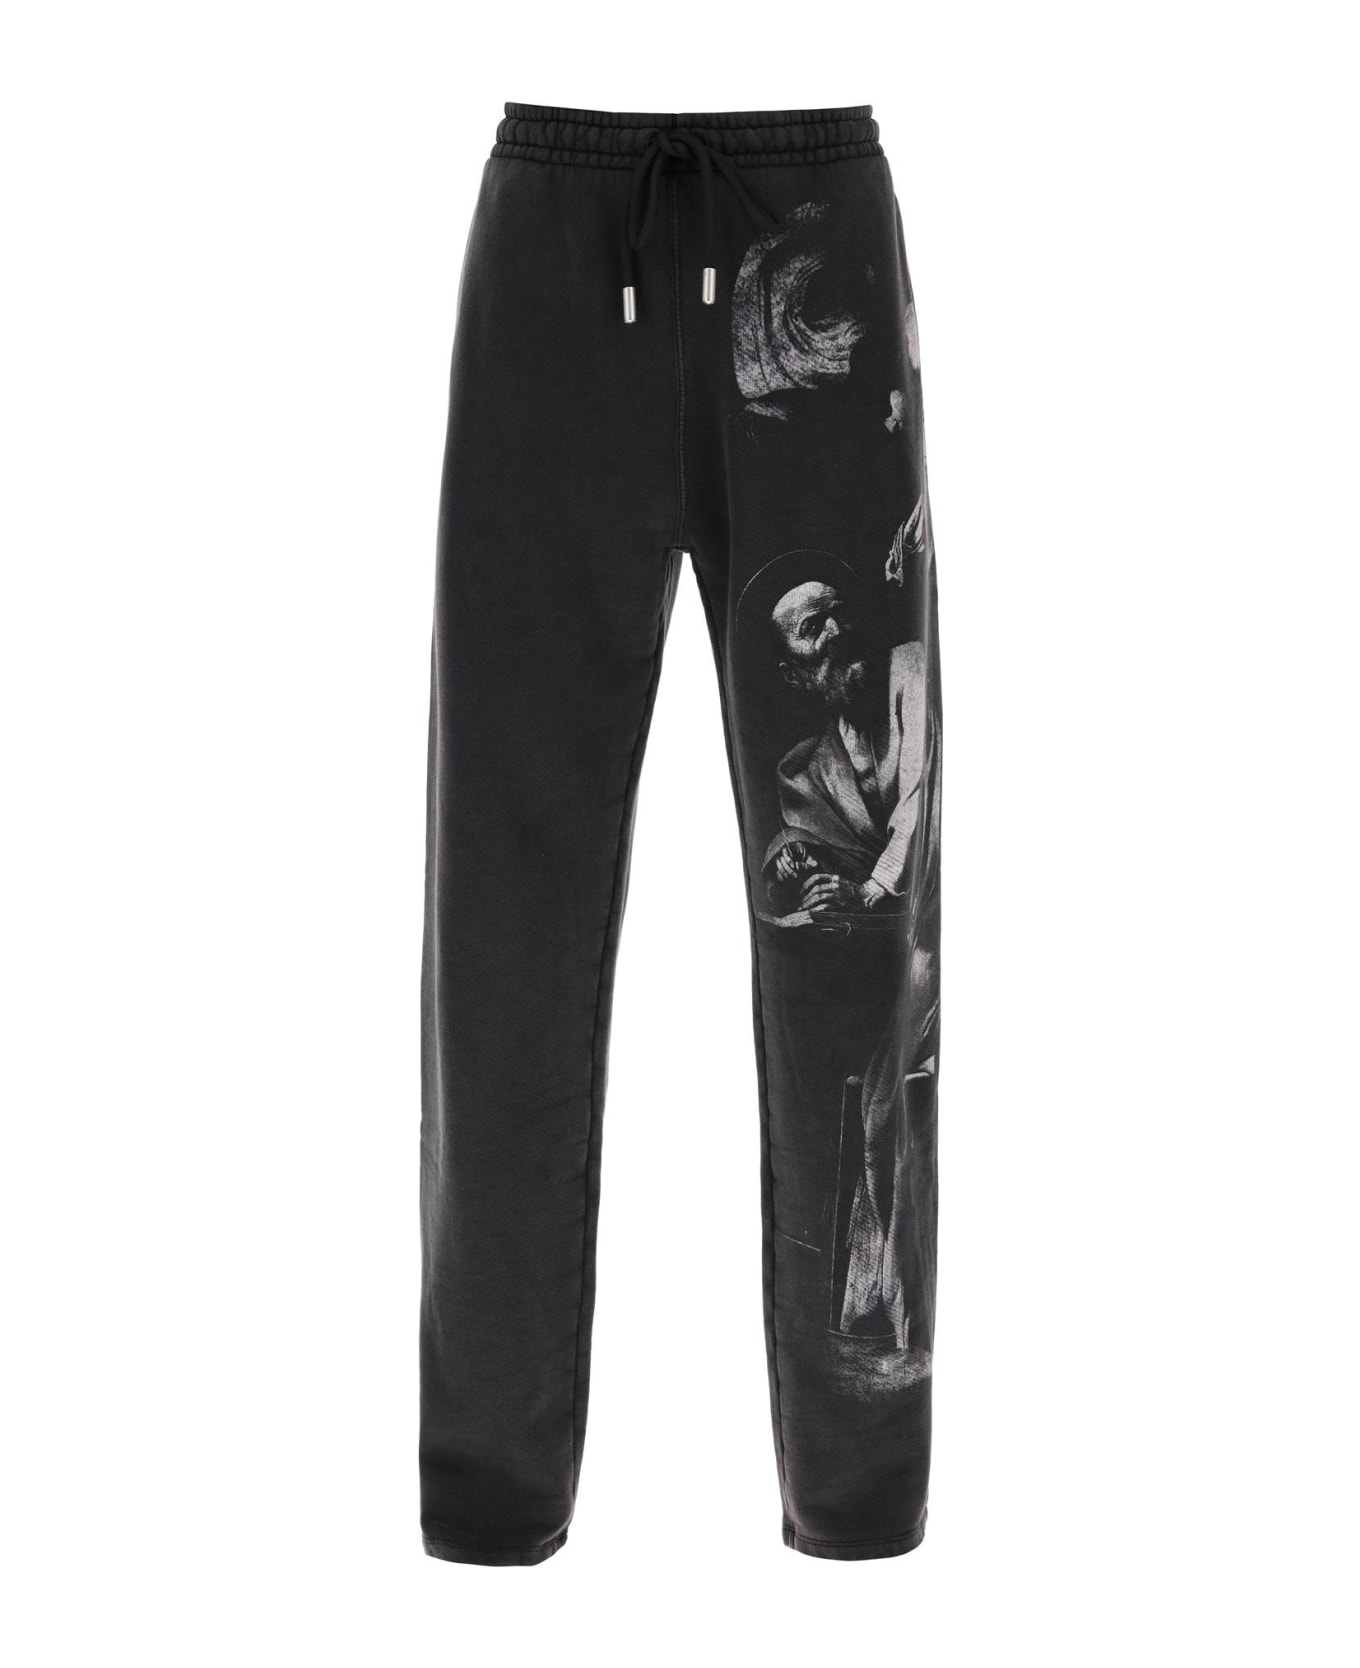 Off-White Pants With Drawstring And Graphic Print - BLACK GREY (Grey) スウェットパンツ